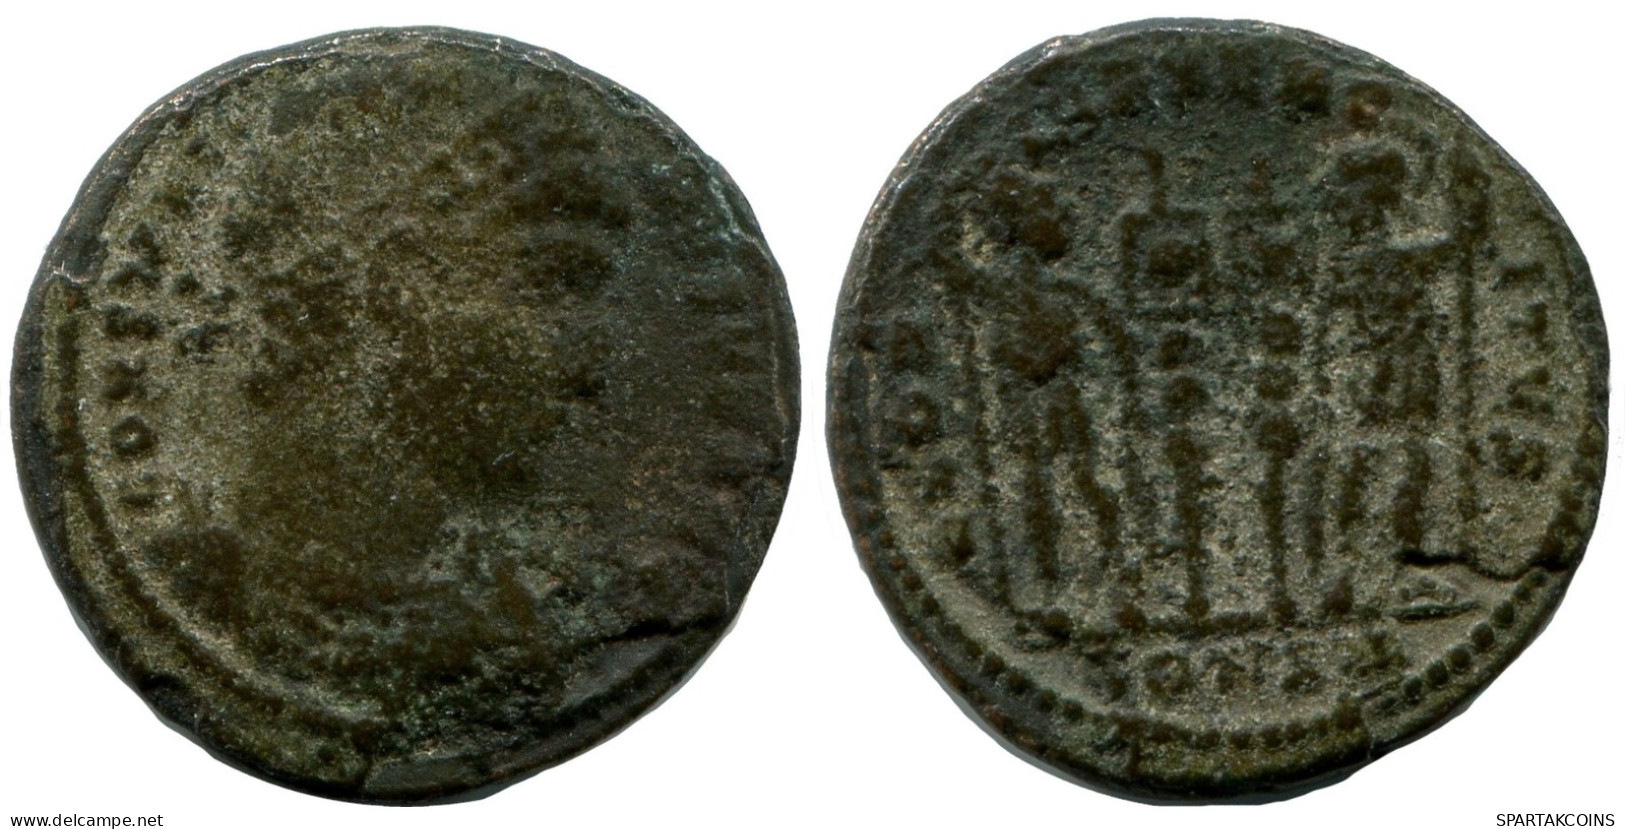 CONSTANTINE I CONSTANTINOPLE FROM THE ROYAL ONTARIO MUSEUM #ANC10776.14.D.A - El Imperio Christiano (307 / 363)